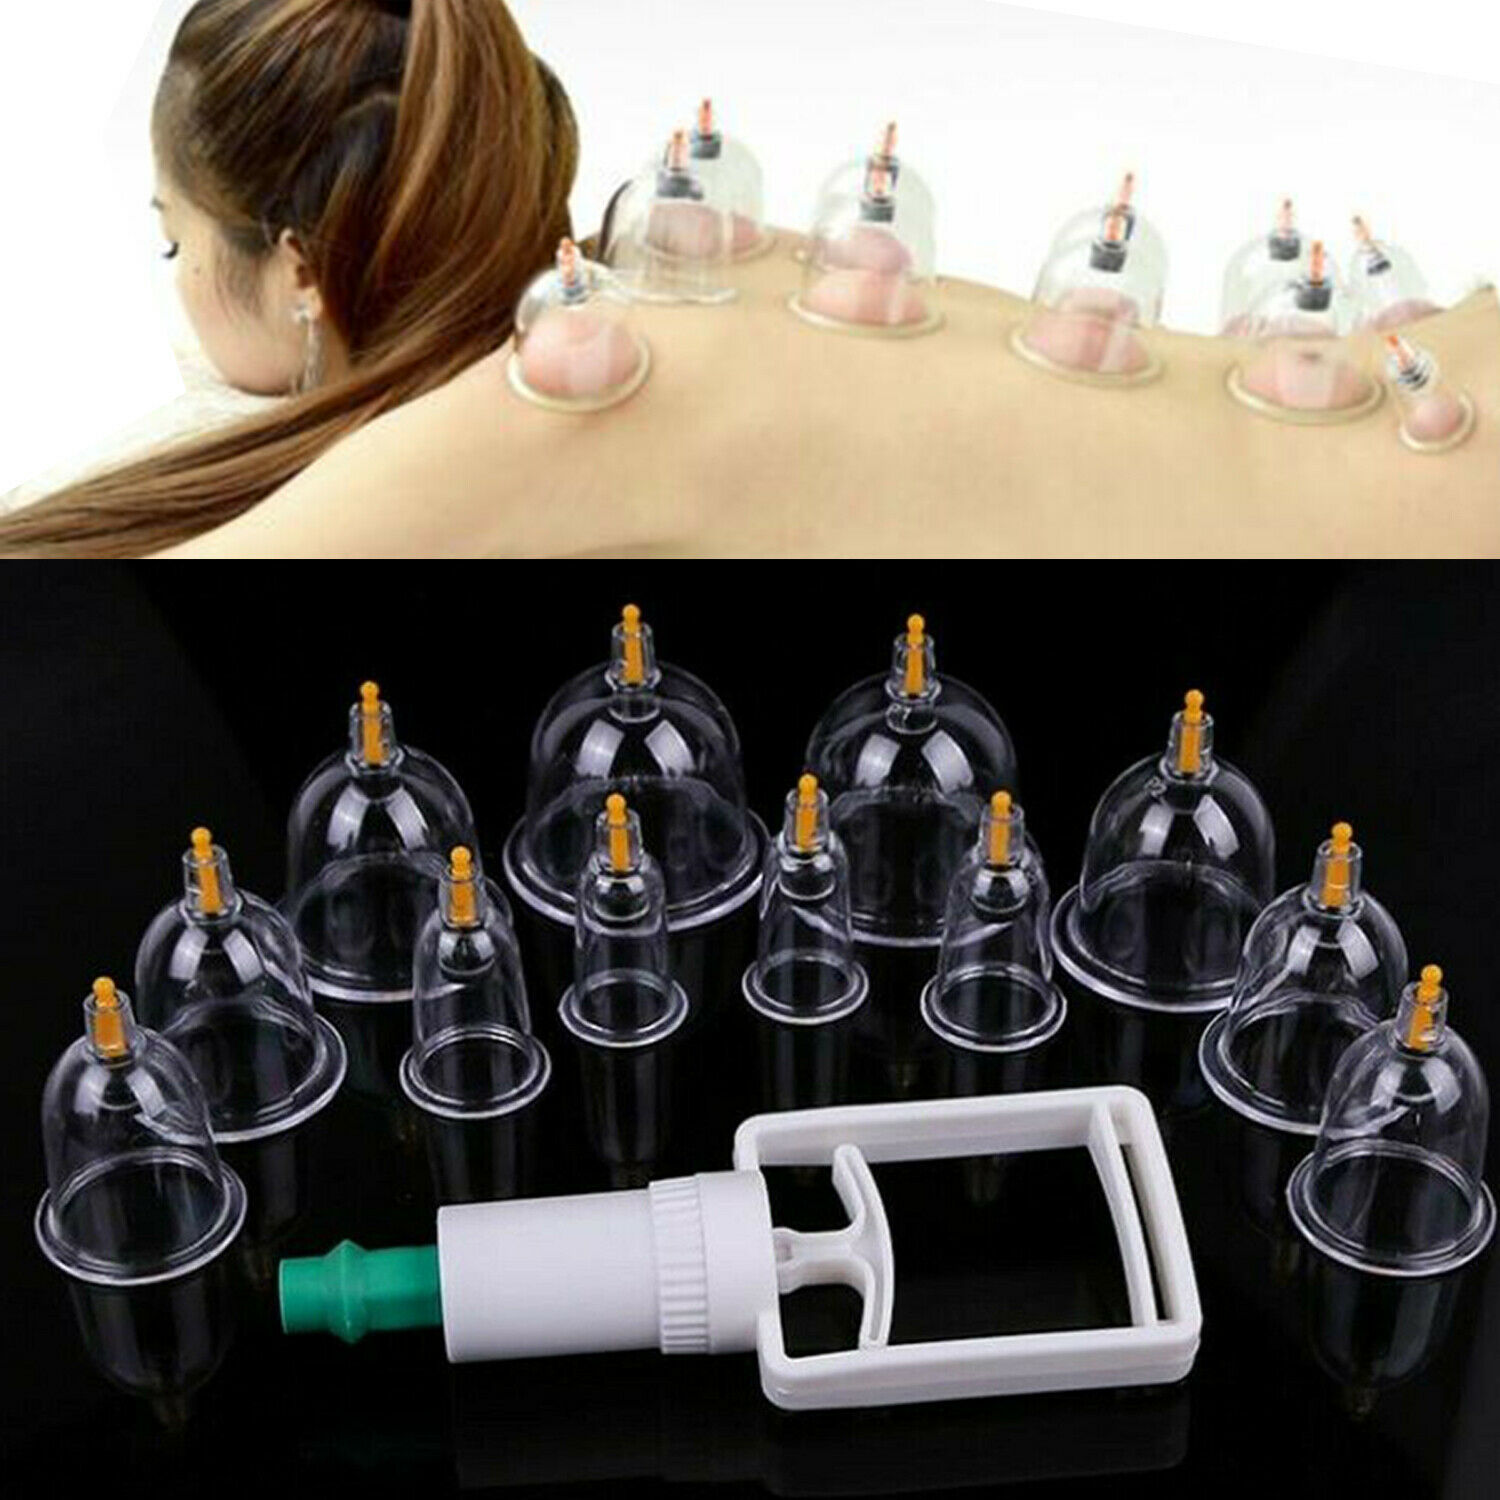 12 Cups/set Medical Chinese Vacuum Cupping Body Massage Therapy Healthy Suction